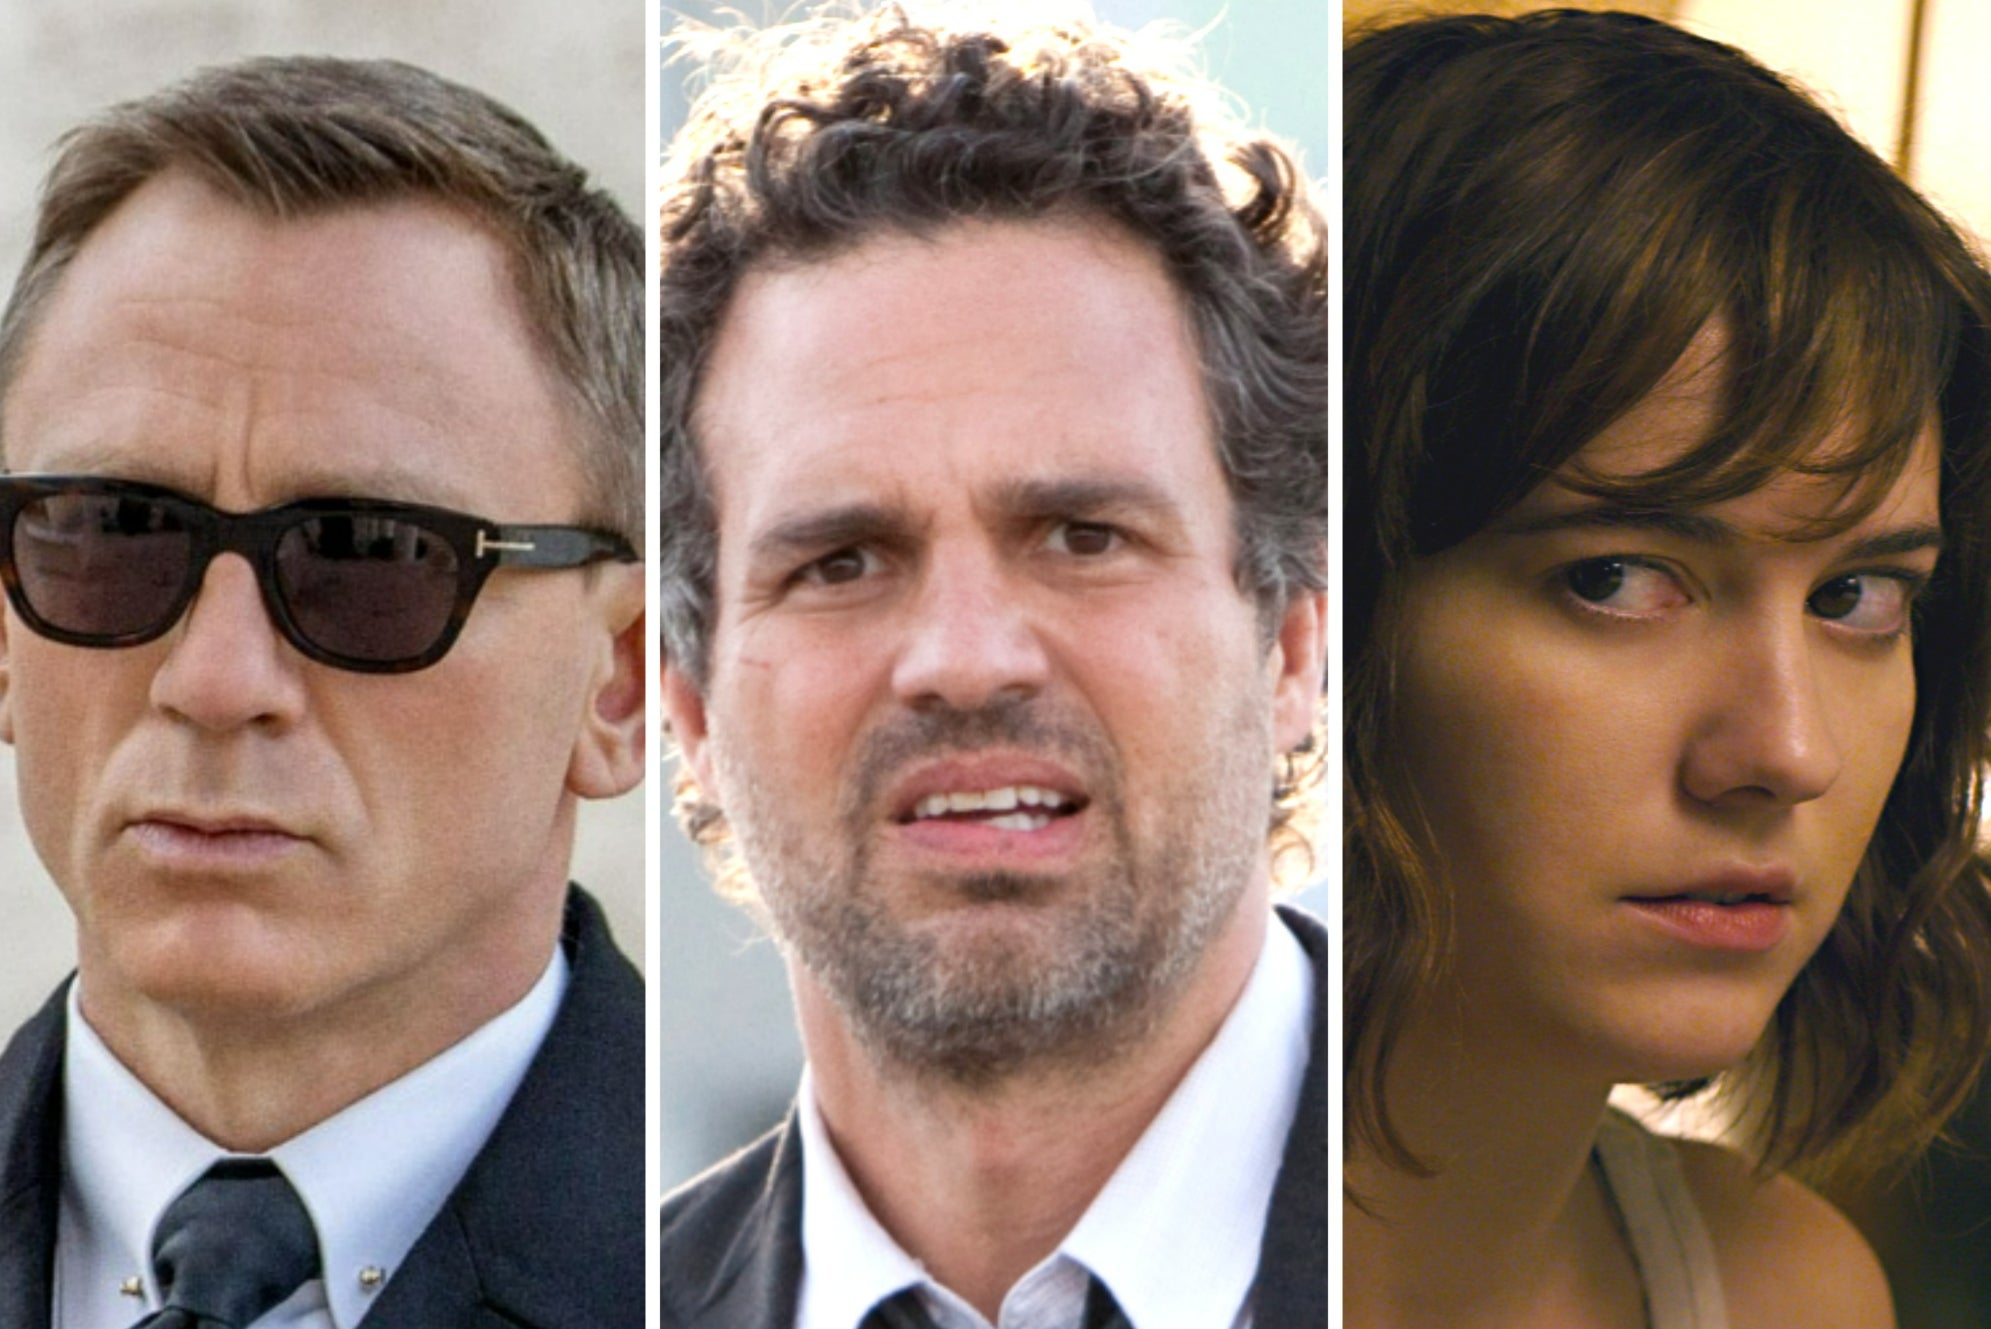 Daniel Craig in ‘Spectre’, Mark Ruffalo in ‘Now You See Me’ and Mary Elizabeth Winstead in ‘10 Cloverfield Lane’